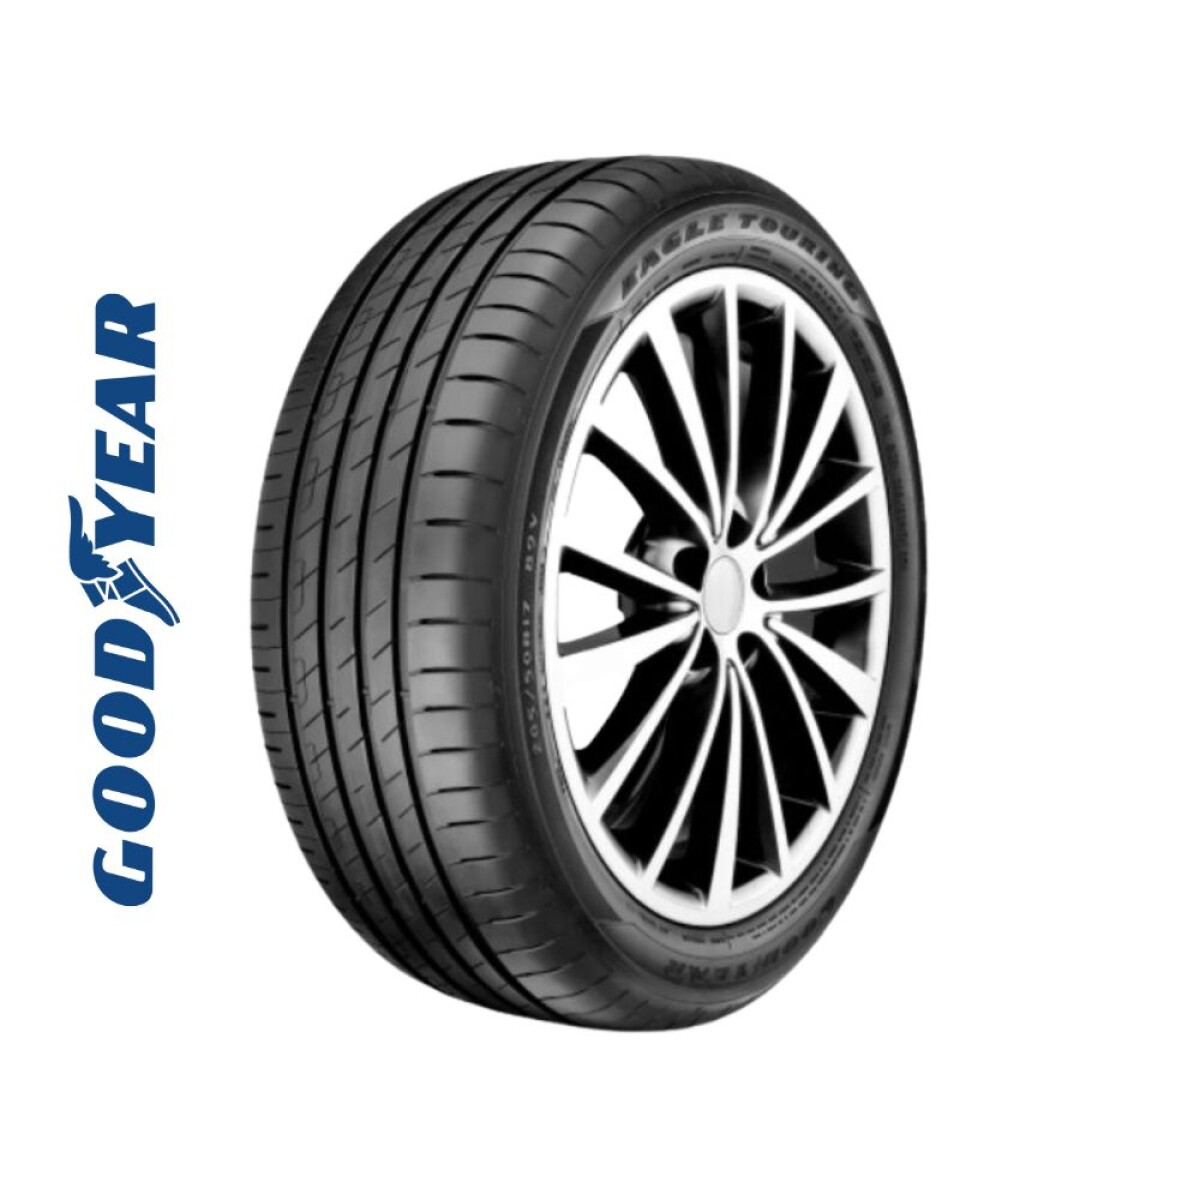 195/60 R16 GOODYEAR EAGLE TOURING 89H 